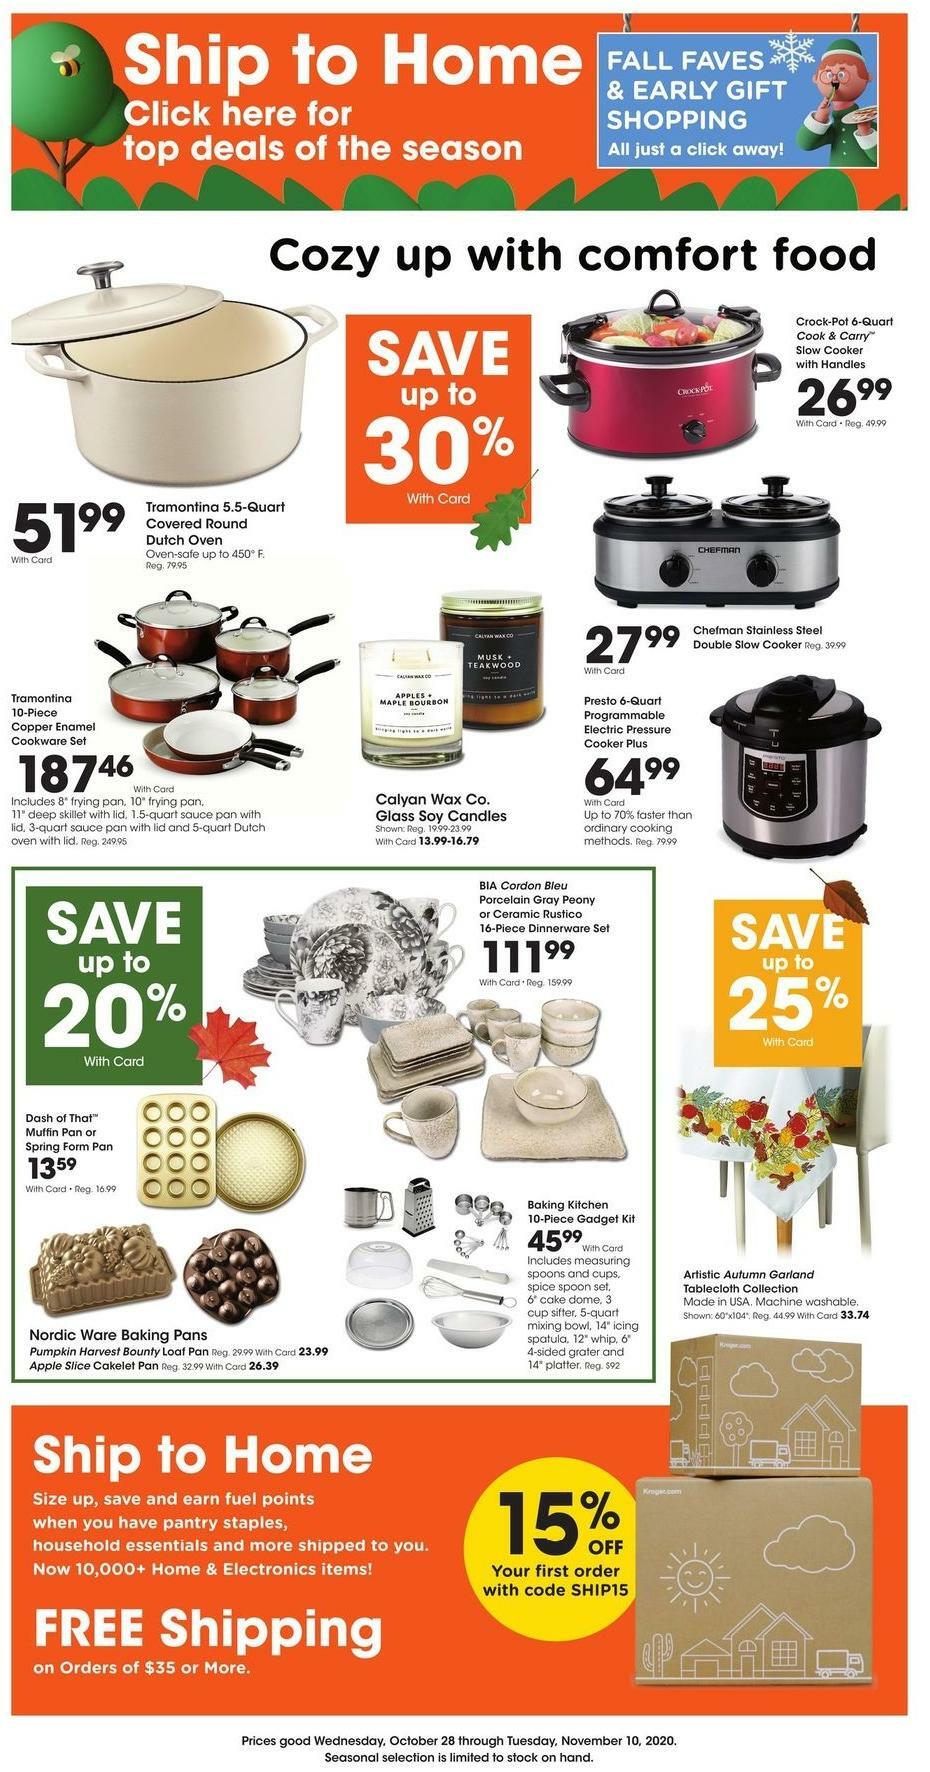 Fred Meyer Ship to Home Weekly Ad from October 28